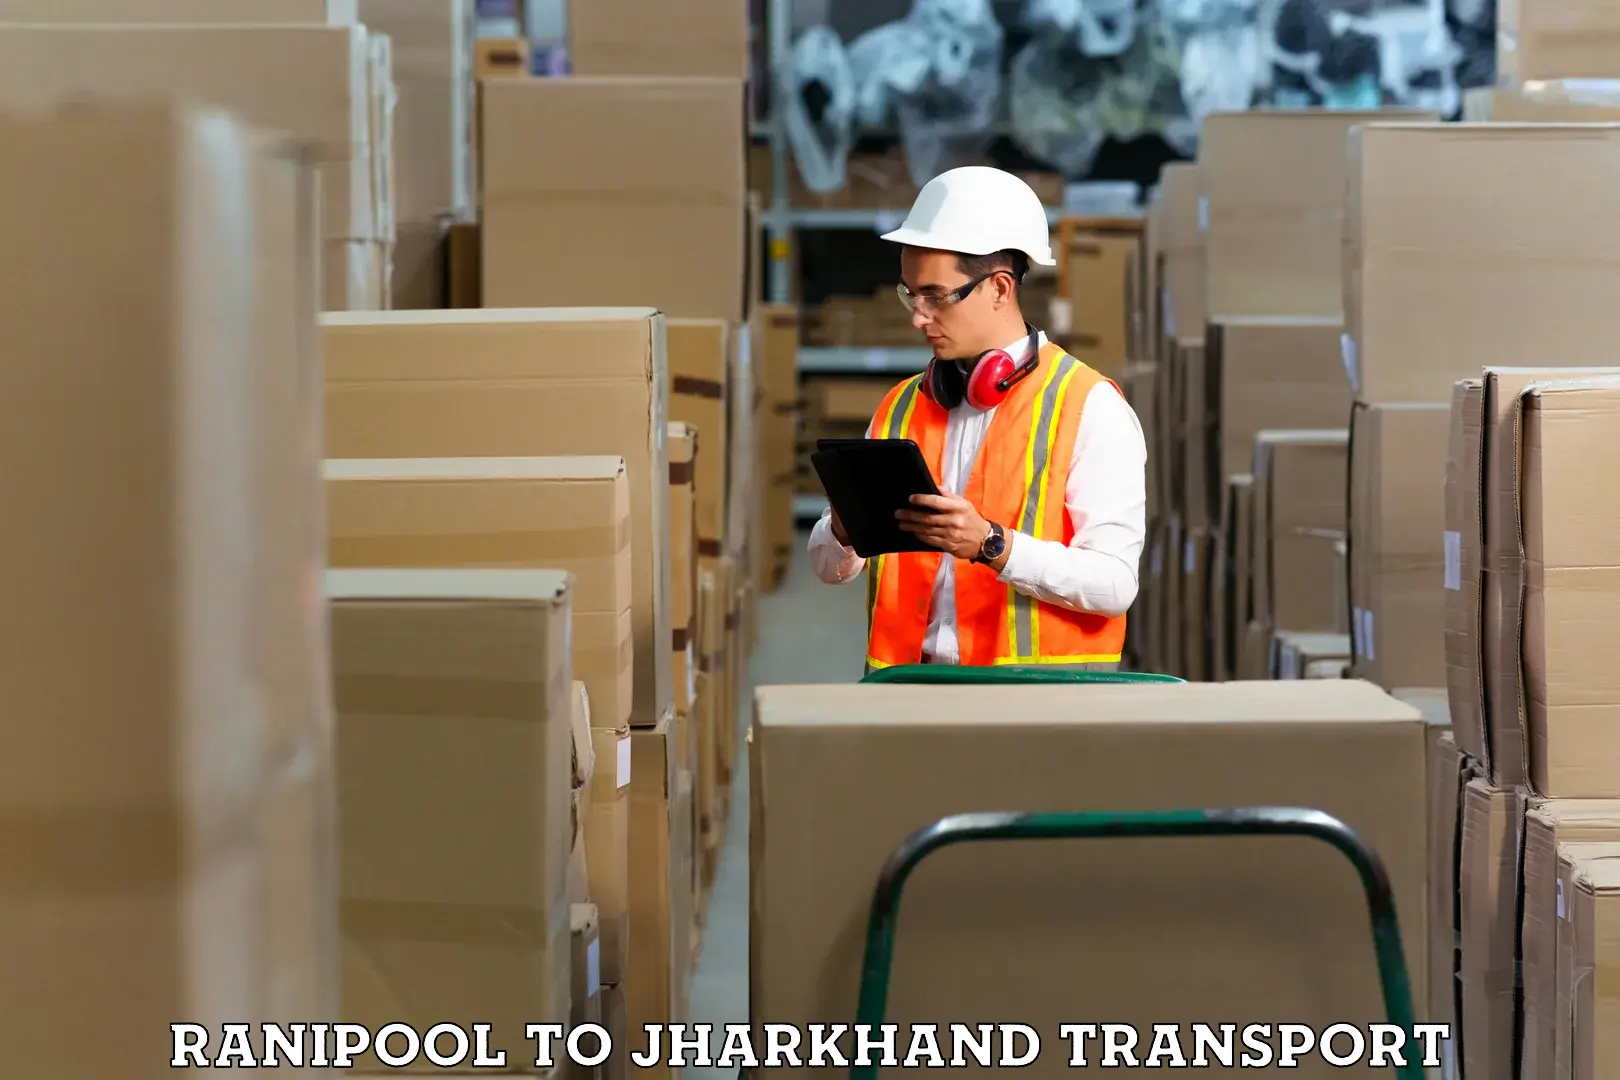 Truck transport companies in India Ranipool to Jharia